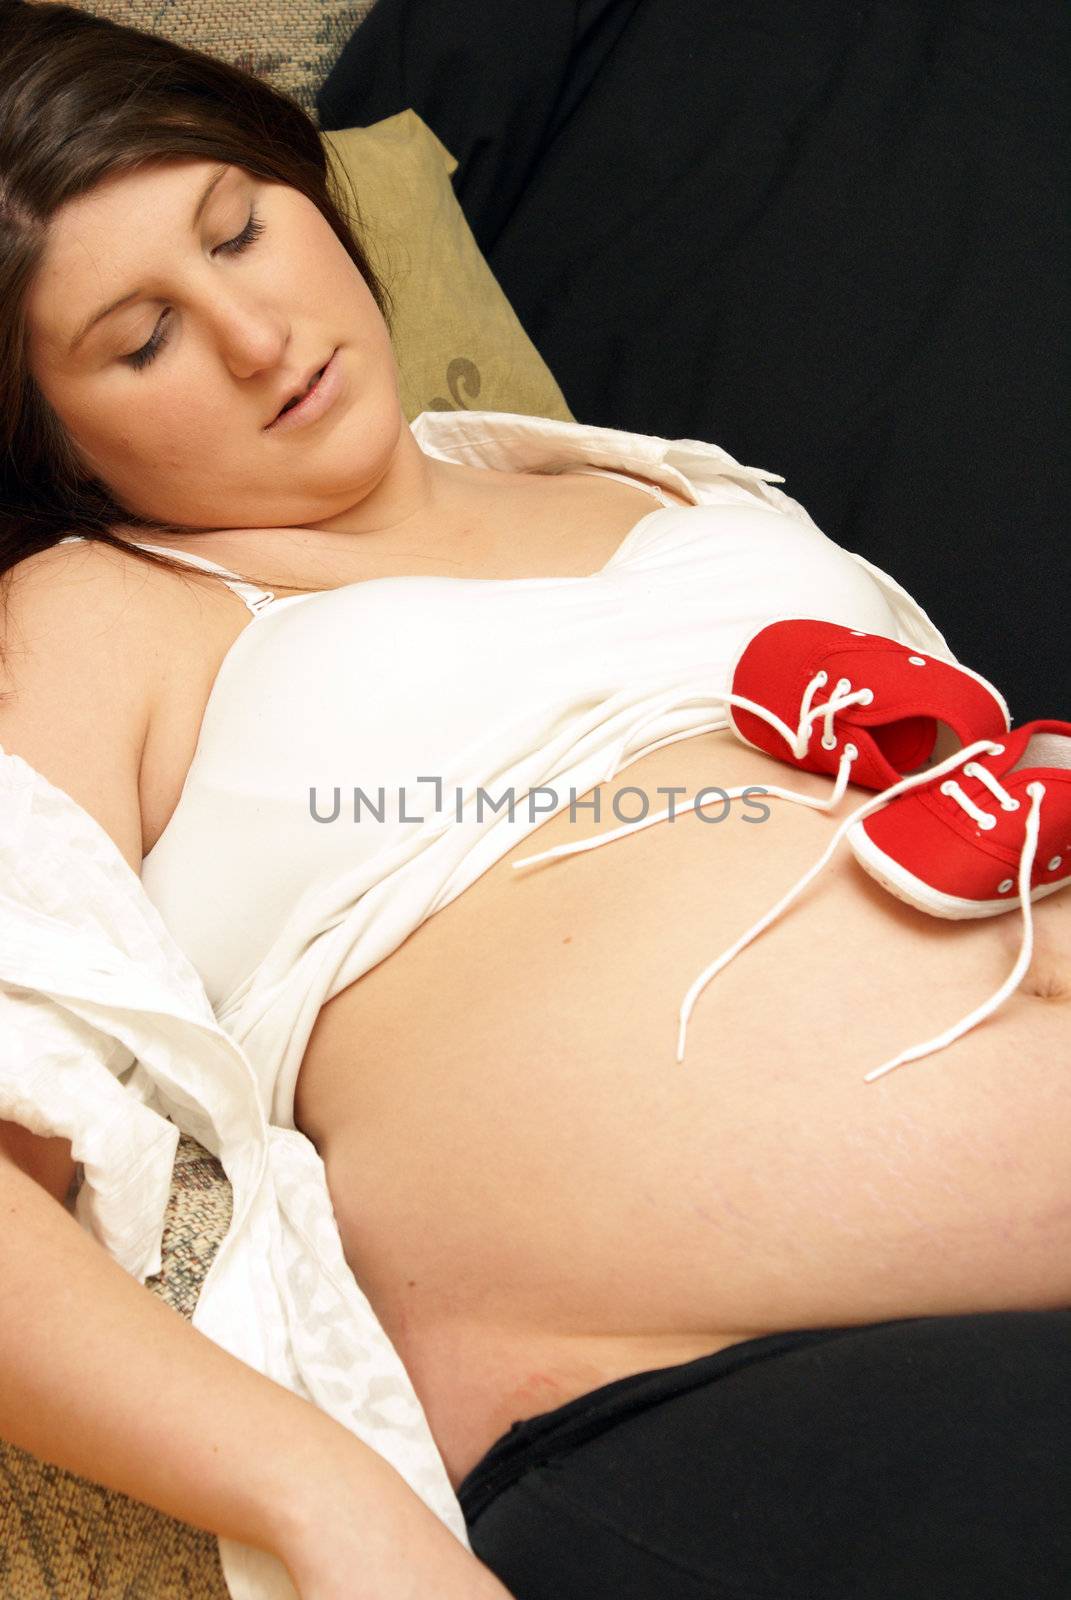 A mother lays back and rests her unborn childs shoes on her belly.